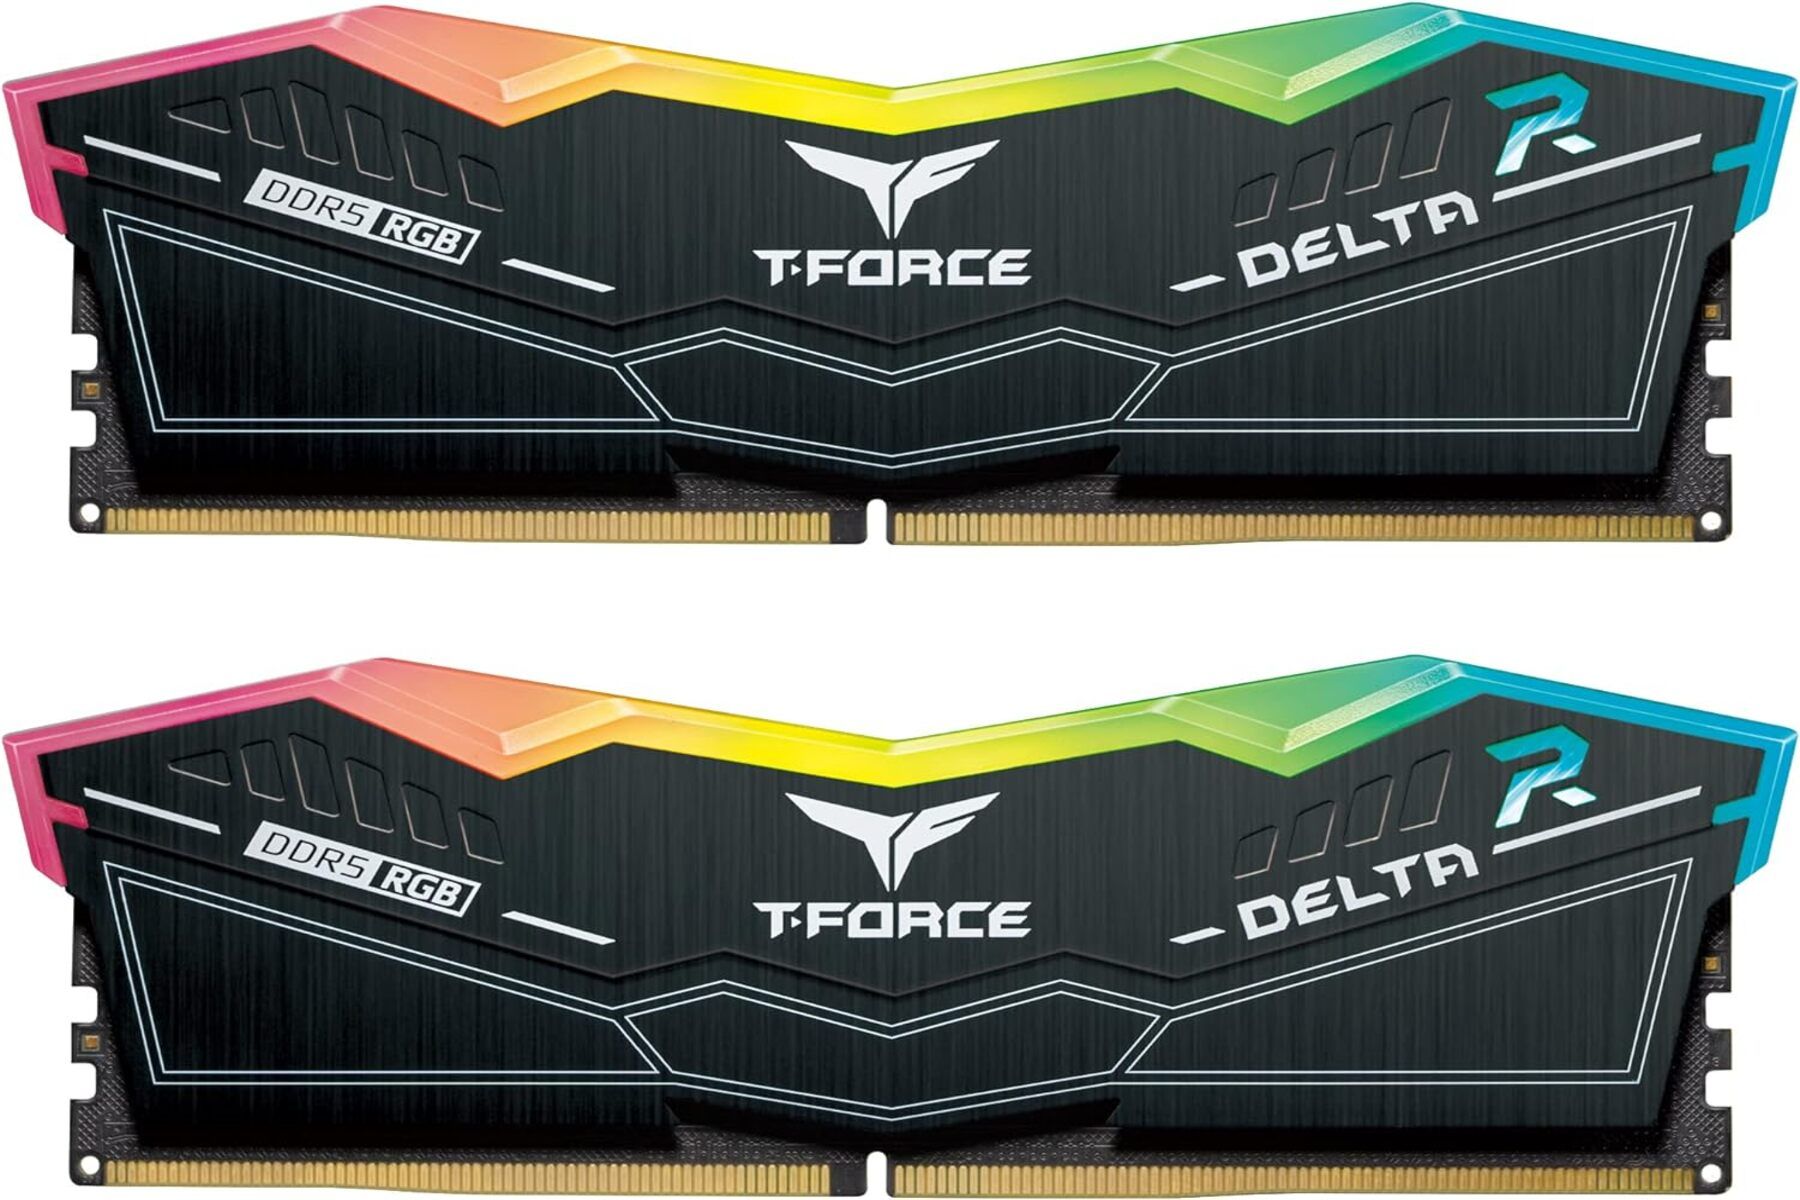 TEAMGROUP T-Force Delta RGB DDR5